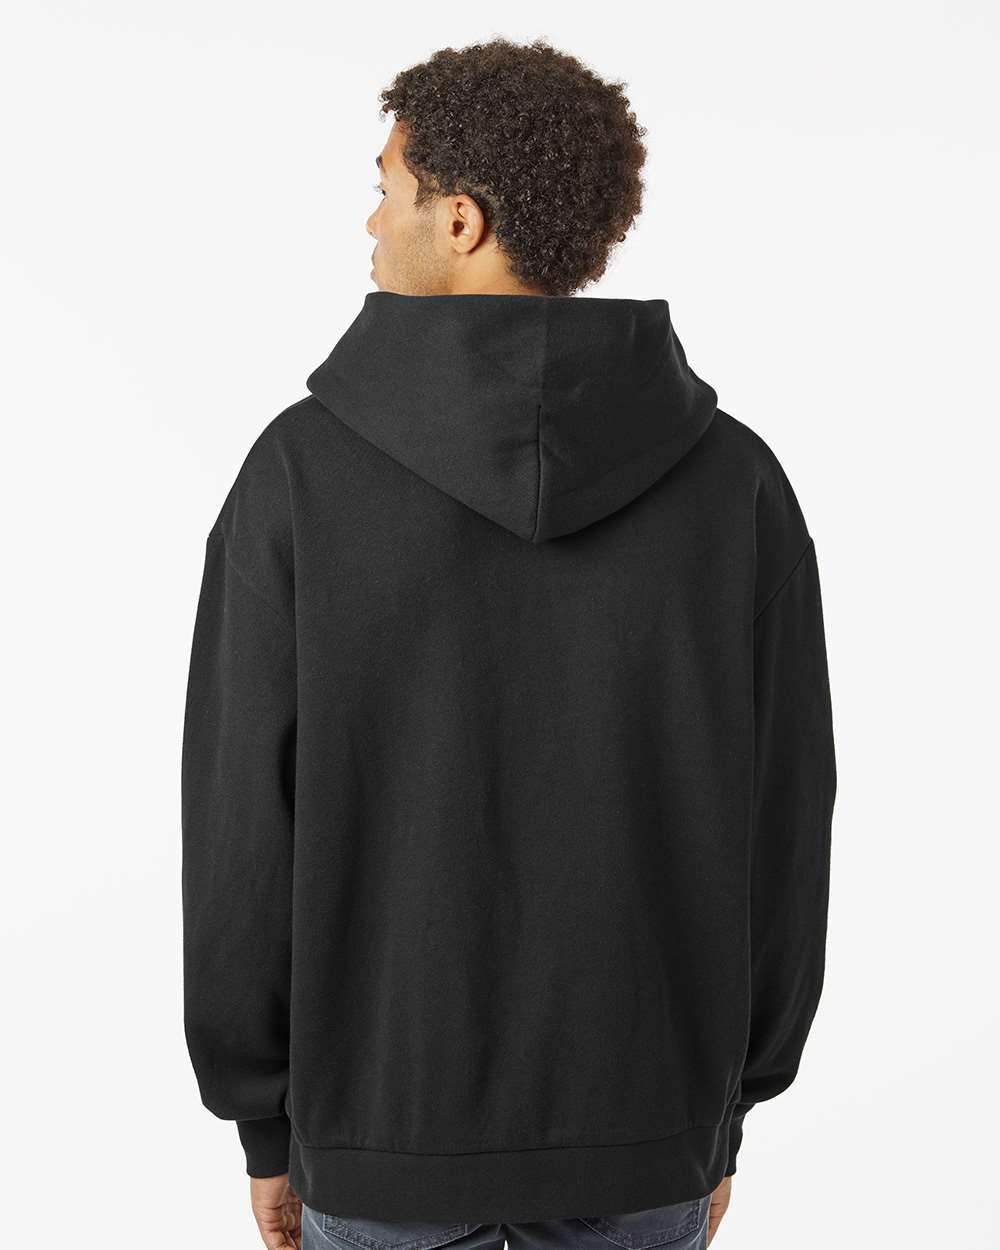 Independent Trading Co. IND280SL - Avenue 280gm Midweight Pullover Hood  $16.58 - Sweatshirts